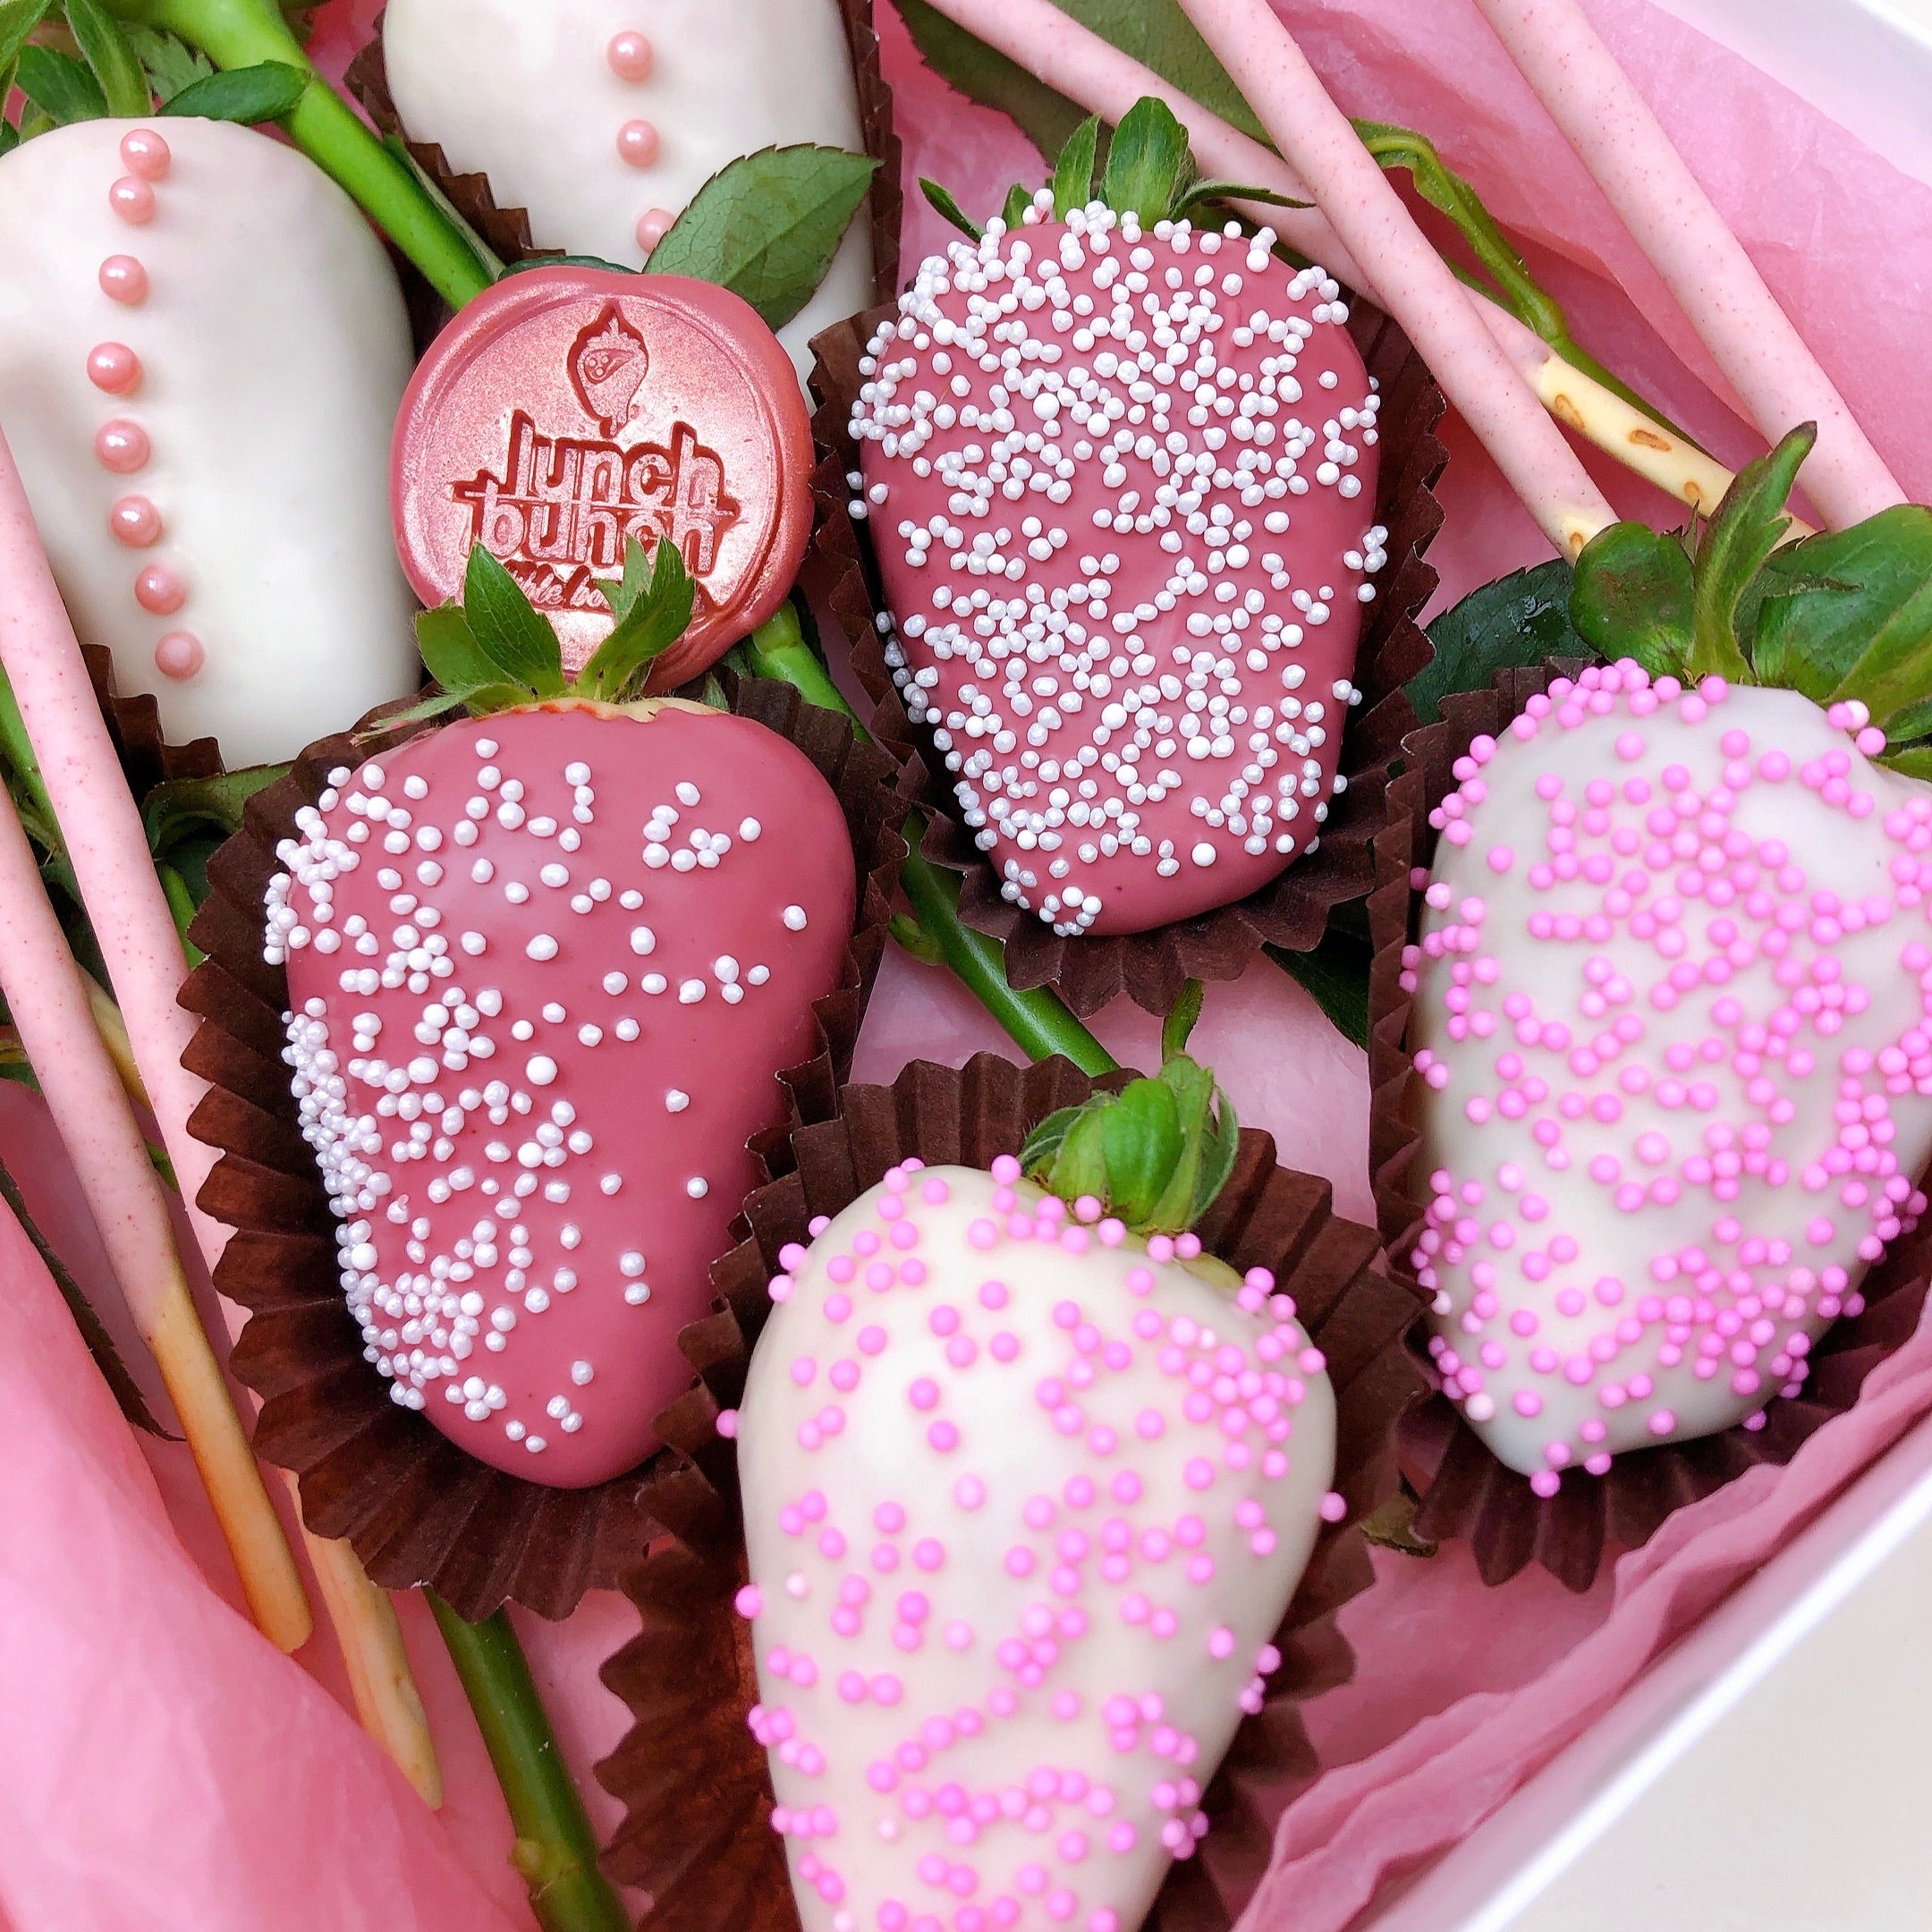 Same day delivery chocolate strawberries and roses in a gift box